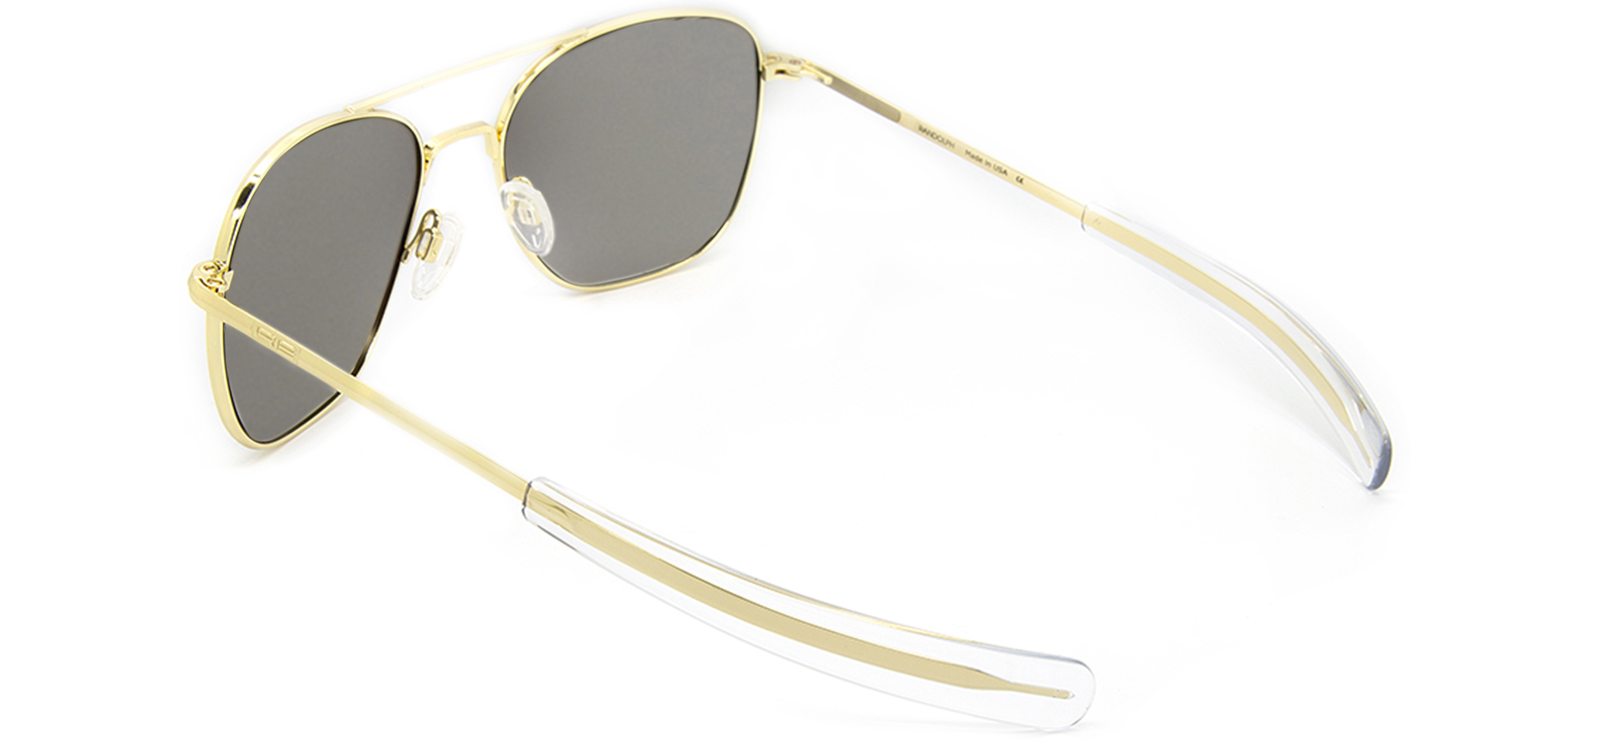 Authentic Aviators, 23k Gold Frames with Cobalt Lenses by Randolph